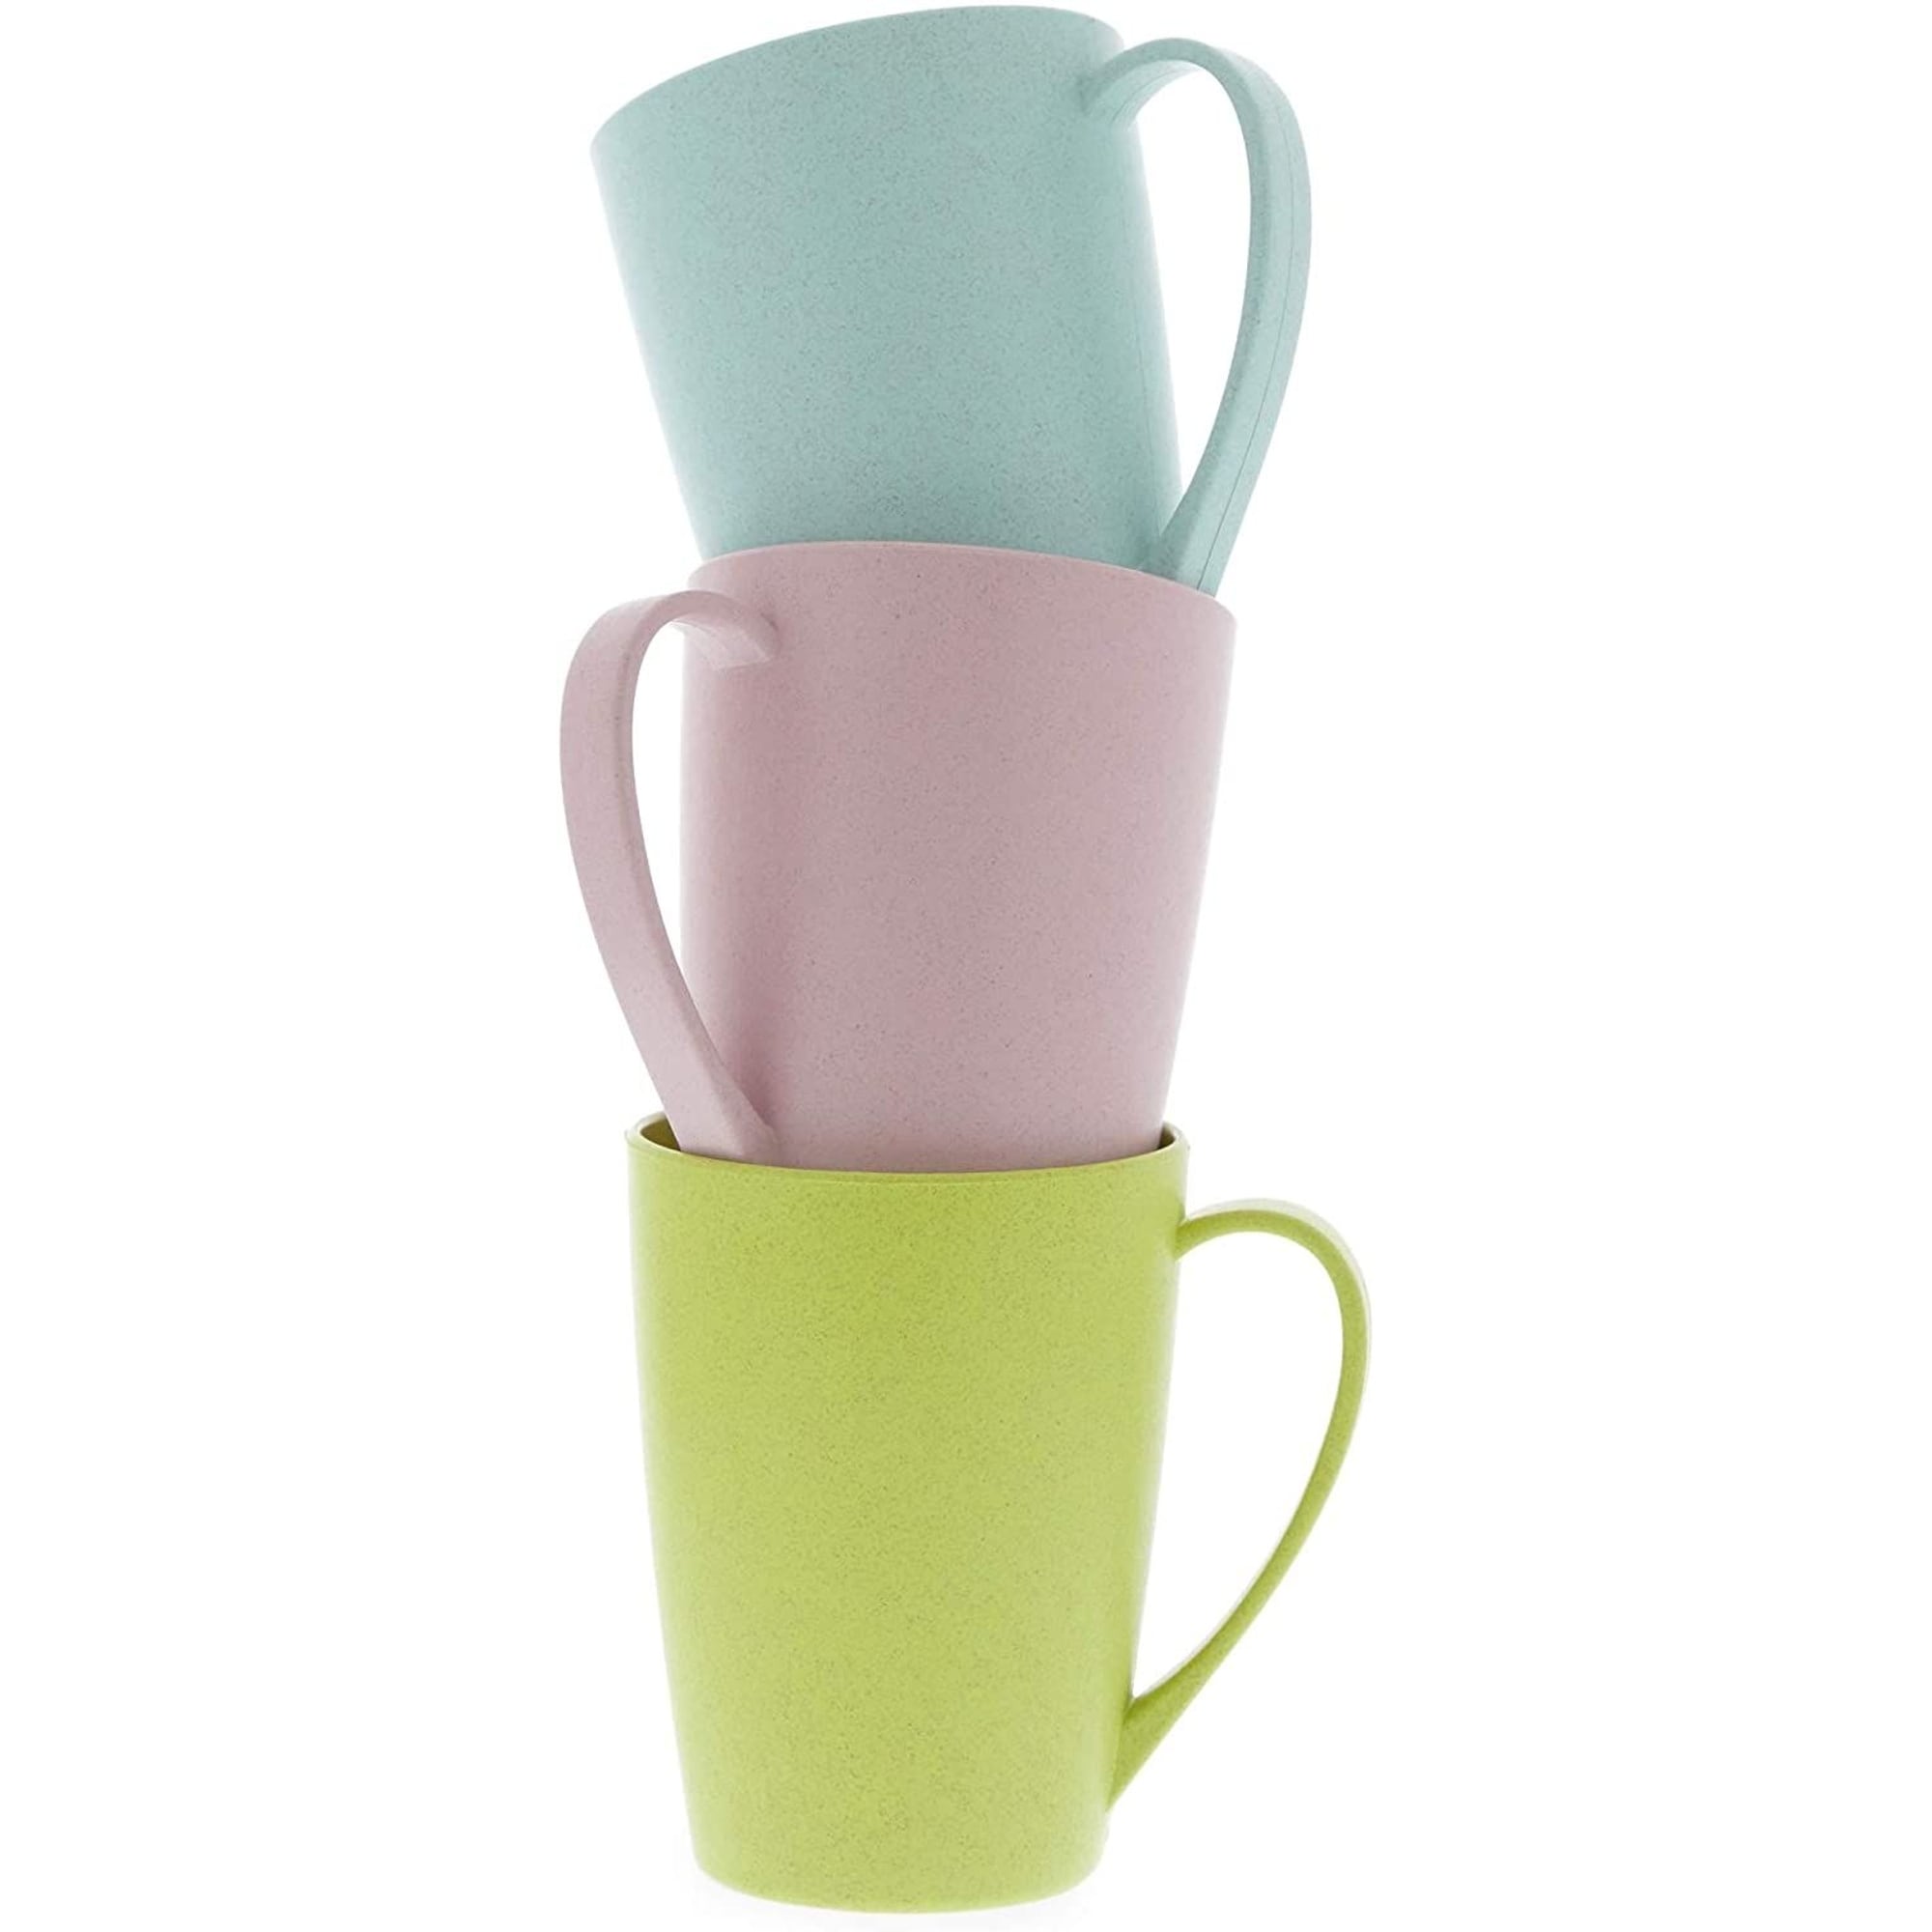 https://ak1.ostkcdn.com/images/products/is/images/direct/cfcb960d92326e6f2a7512eef341aa1974cabf0d/Wheat-Straw-Mugs%2C-Unbreakable-Coffee-Mug-Set-%2812-oz%2C-6-Pack%29.jpg